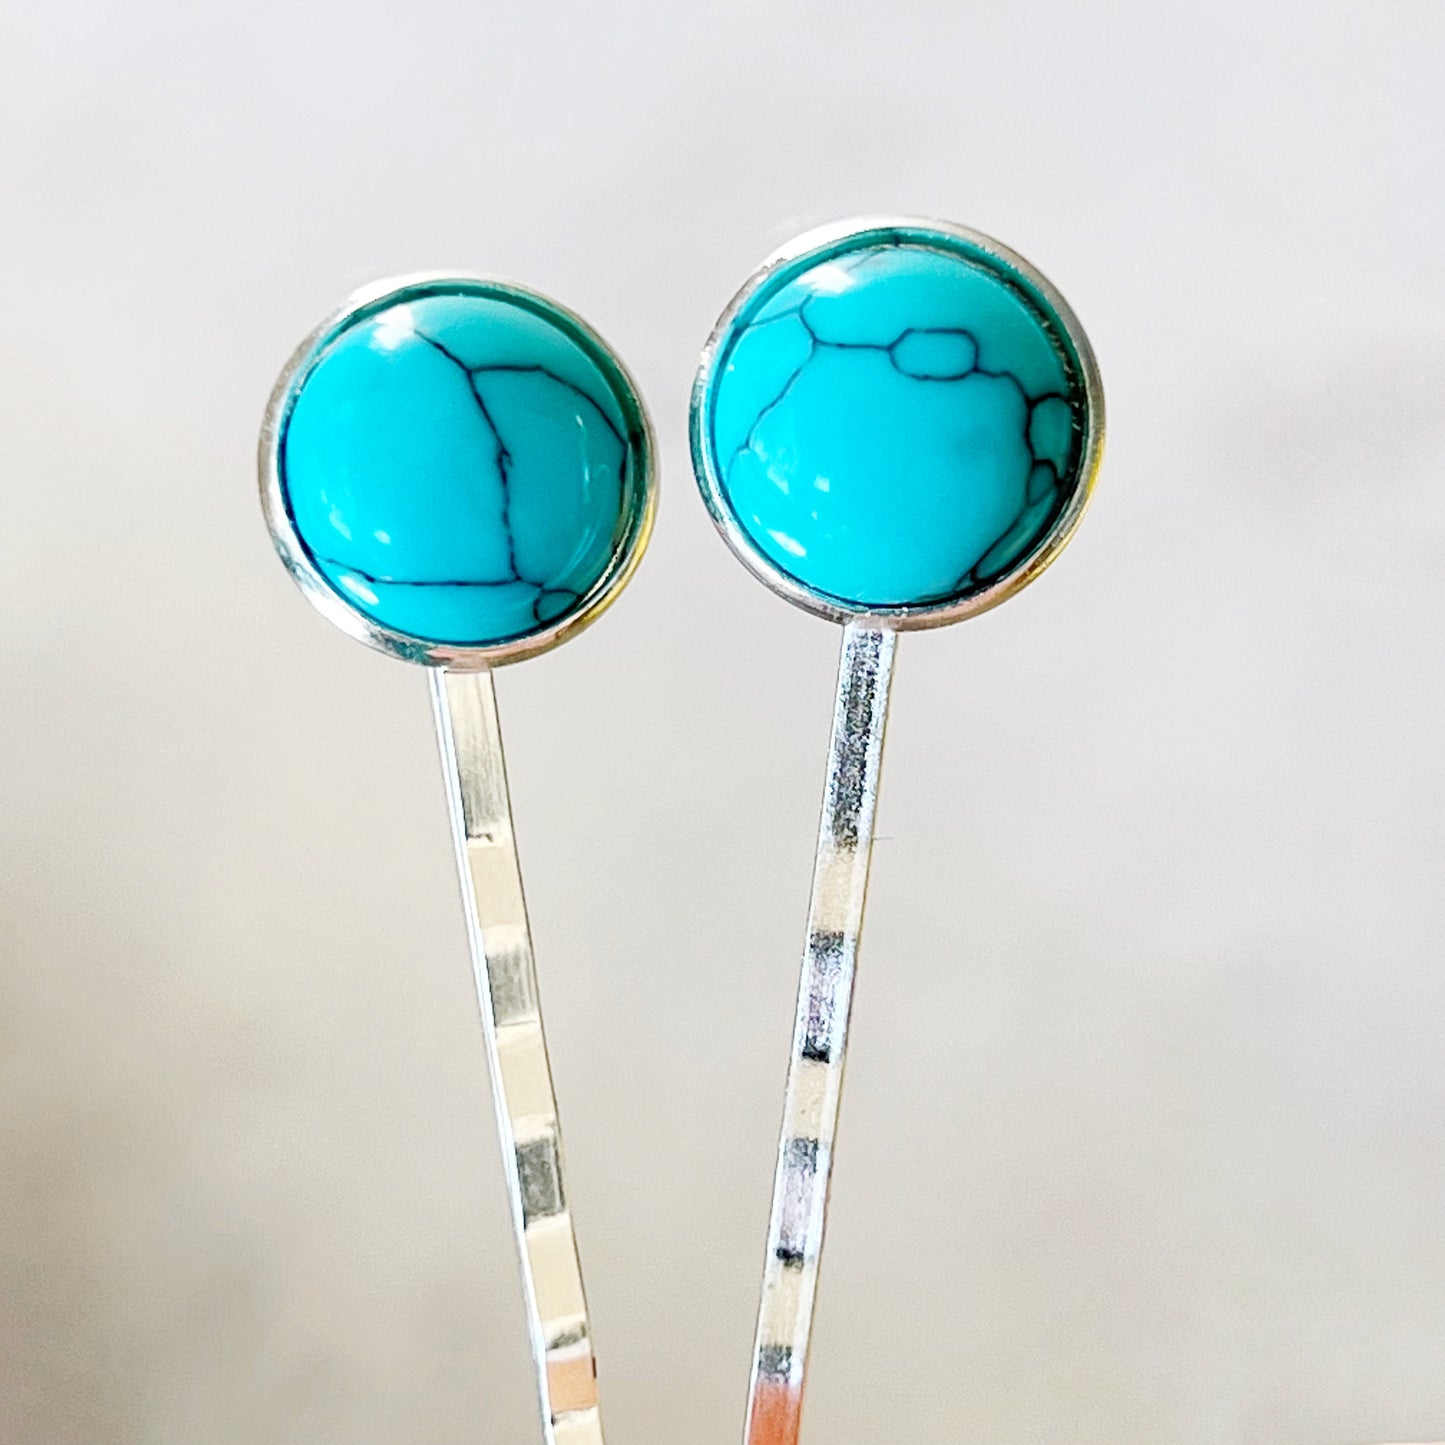 Boho Western Turquoise Silver Hair Pins - Stylish Accessories with a Western Flair